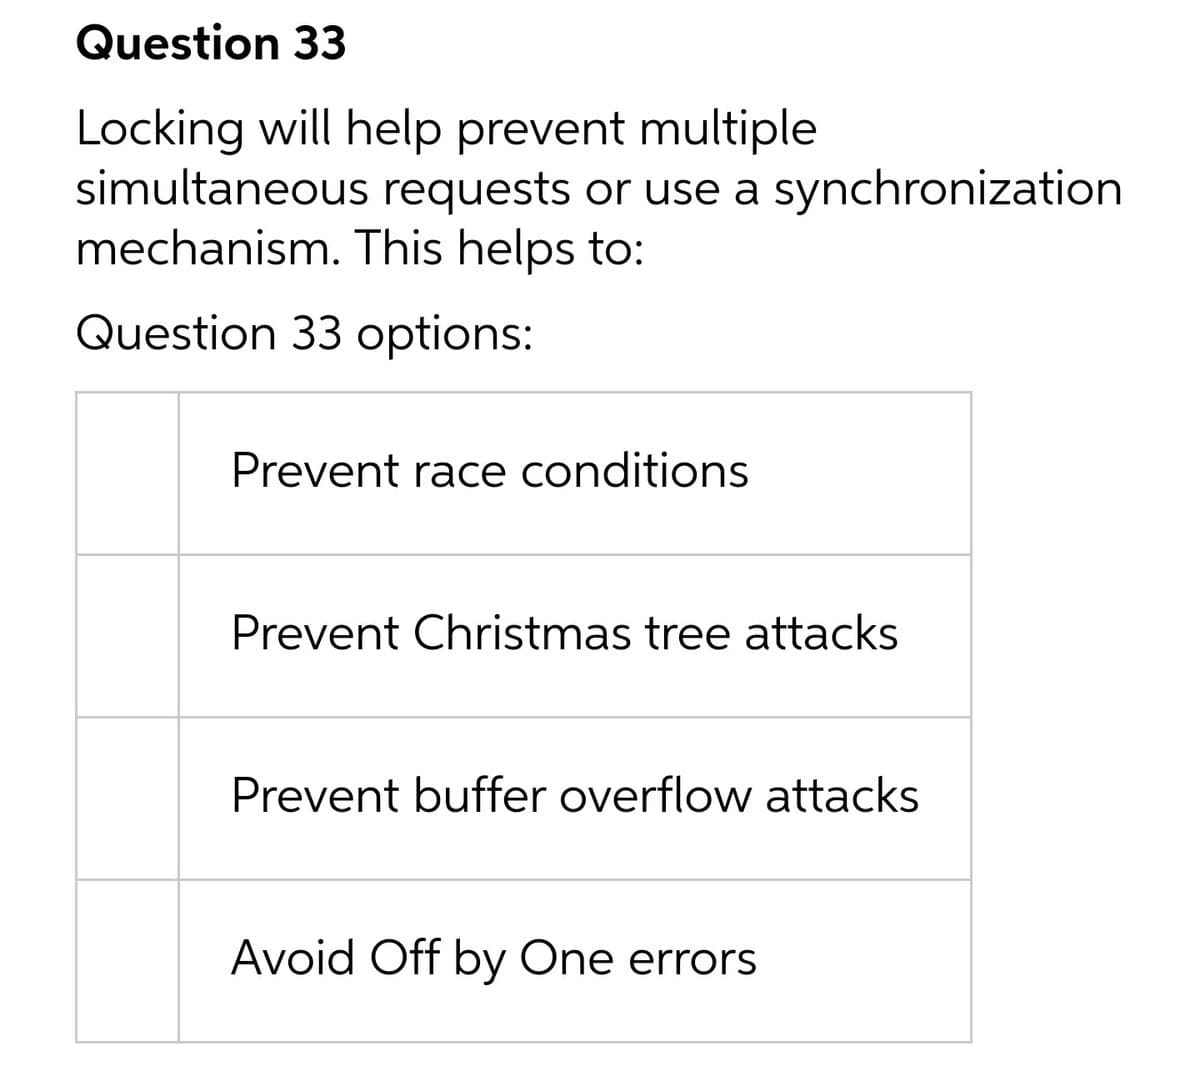 Question 33
Locking will help prevent multiple
simultaneous requests or use a synchronization
mechanism. This helps to:
Question 33 options:
Prevent race conditions
Prevent Christmas tree attacks
Prevent buffer overflow attacks
Avoid Off by One errors
